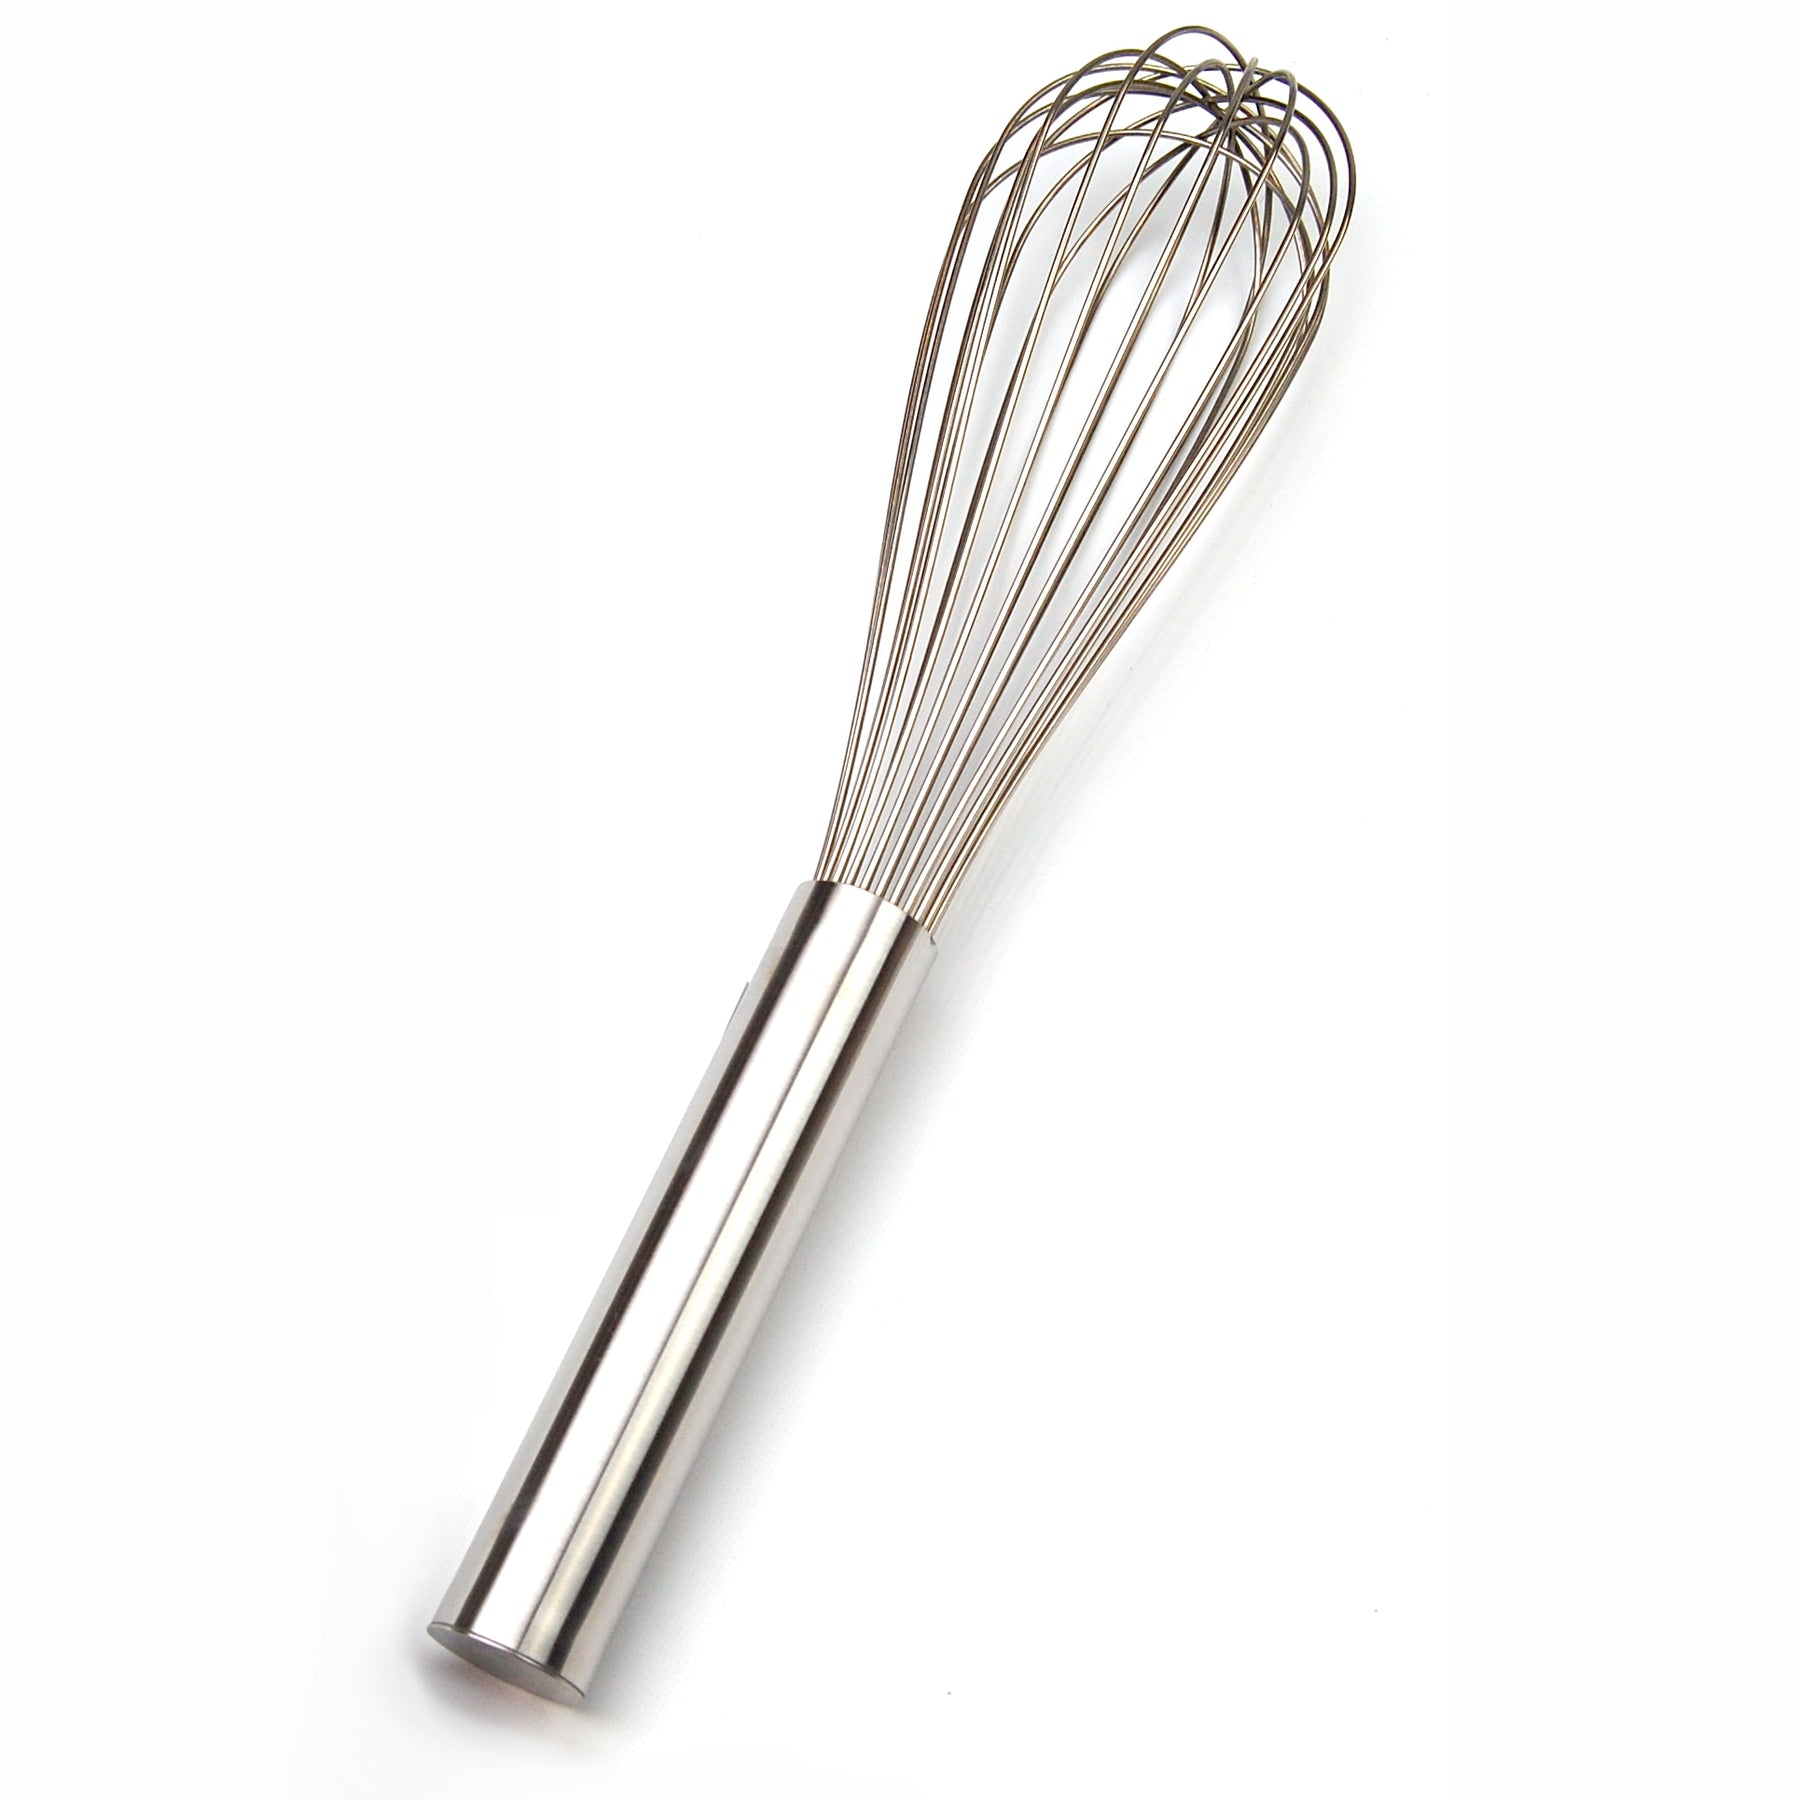 2 Large Wire Whisk Stainless Steel Professional Commercial Used Good  Condition